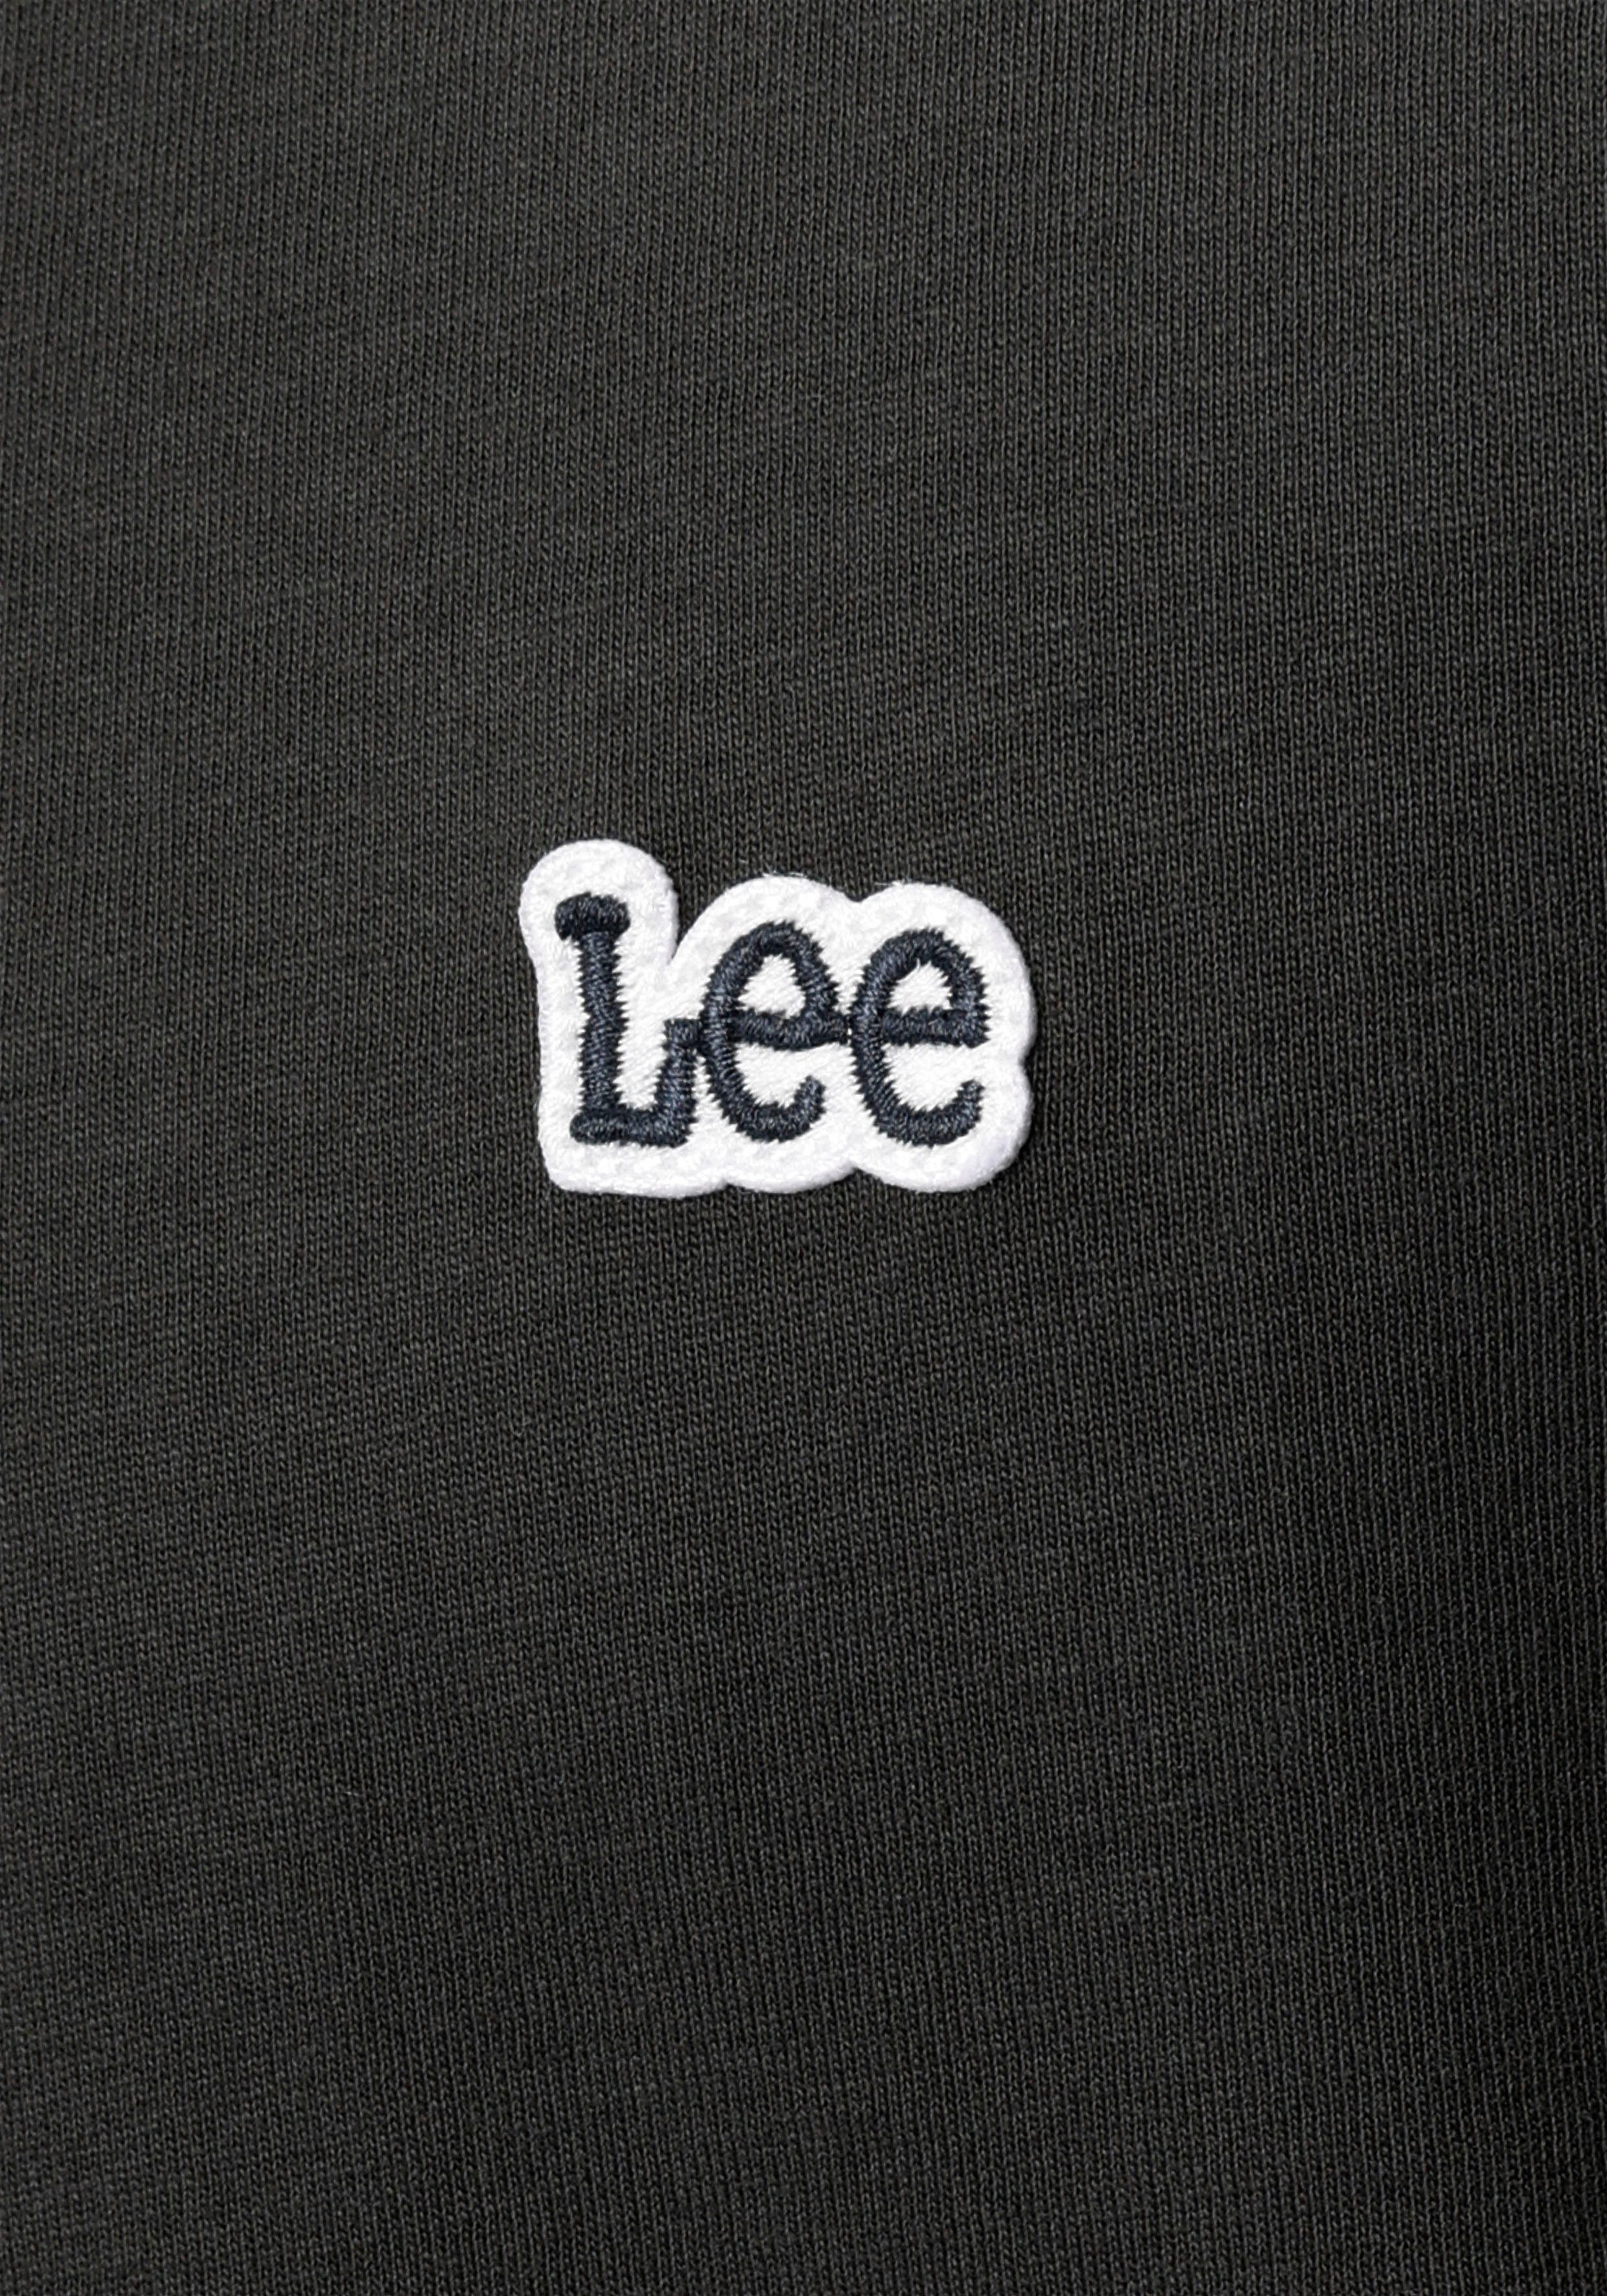 Lee® T-Shirt PATCH LOGO TEE washed-black